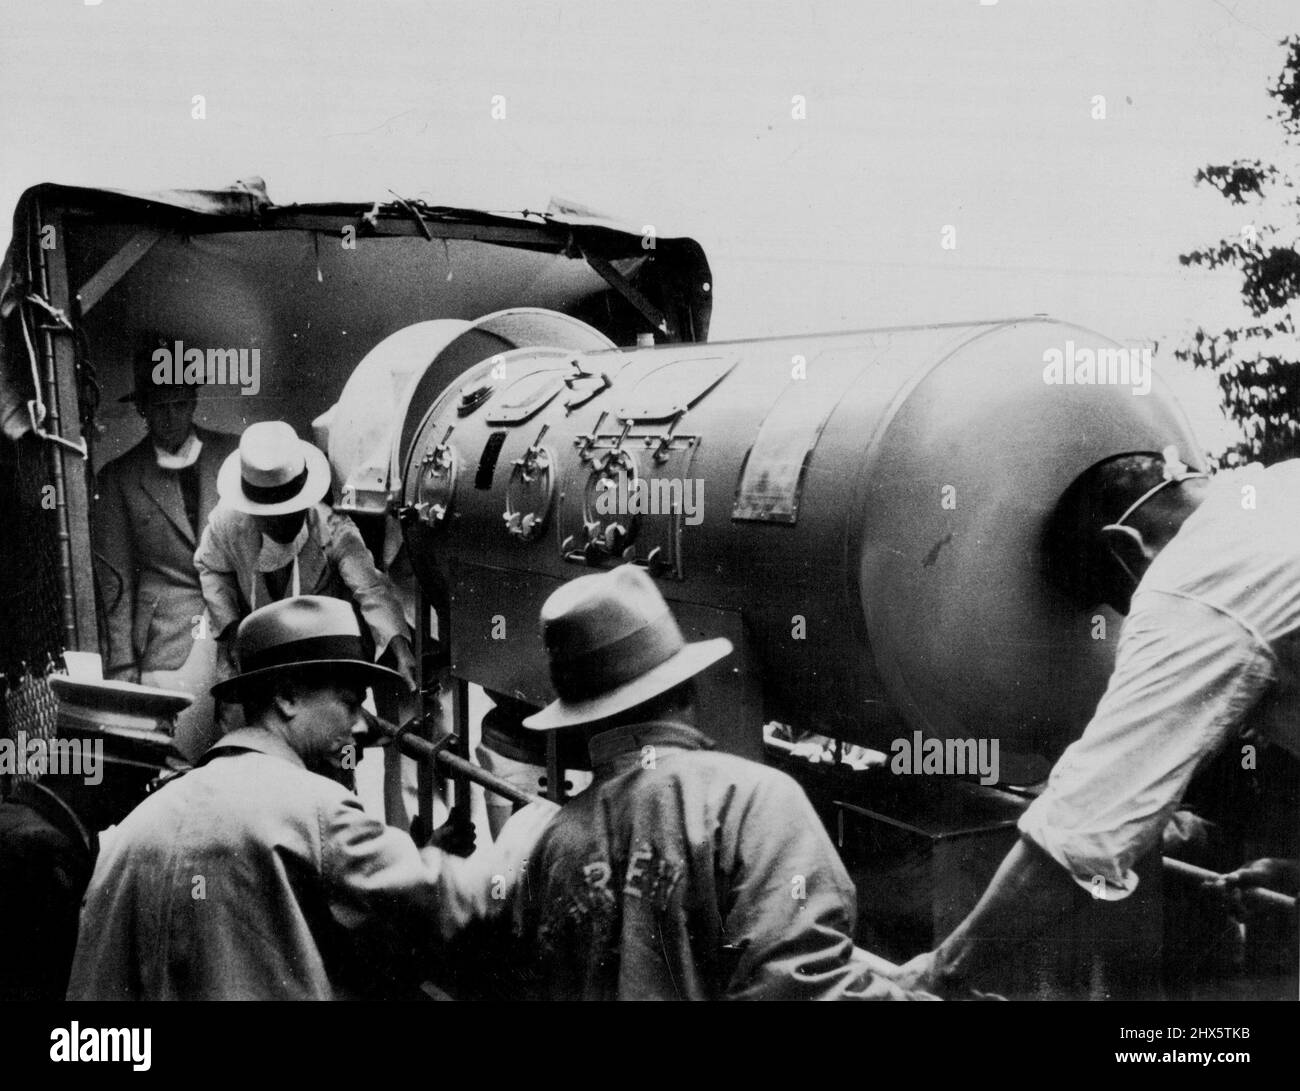 American attendants adjusting the 'Iron lung,' the respirator in which Frederick J. Snite, jun., was taken from Peking, China to America. Snite, the son of a wealthy Chicago merchant, was suffering from infantile paralysis. Before being taken to America. Snite was confined in the 'Iron lung' for 15 months. July 13, 1937. Stock Photo